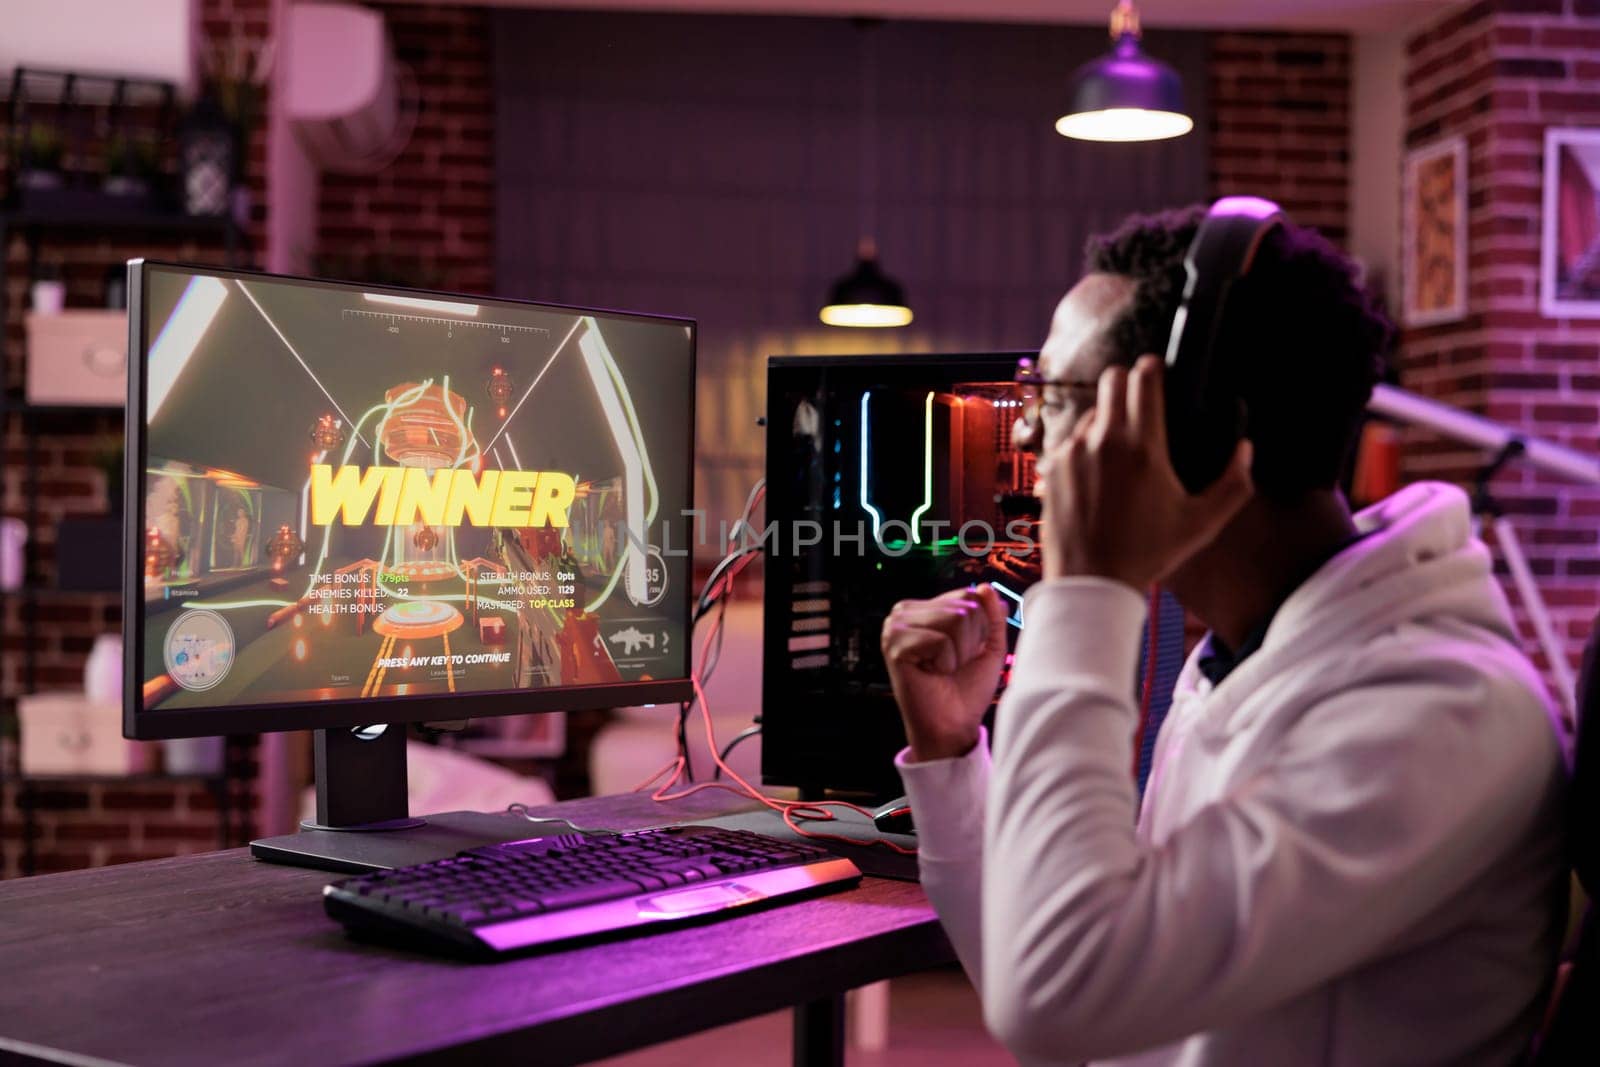 Gamer happy about winning online match by DCStudio